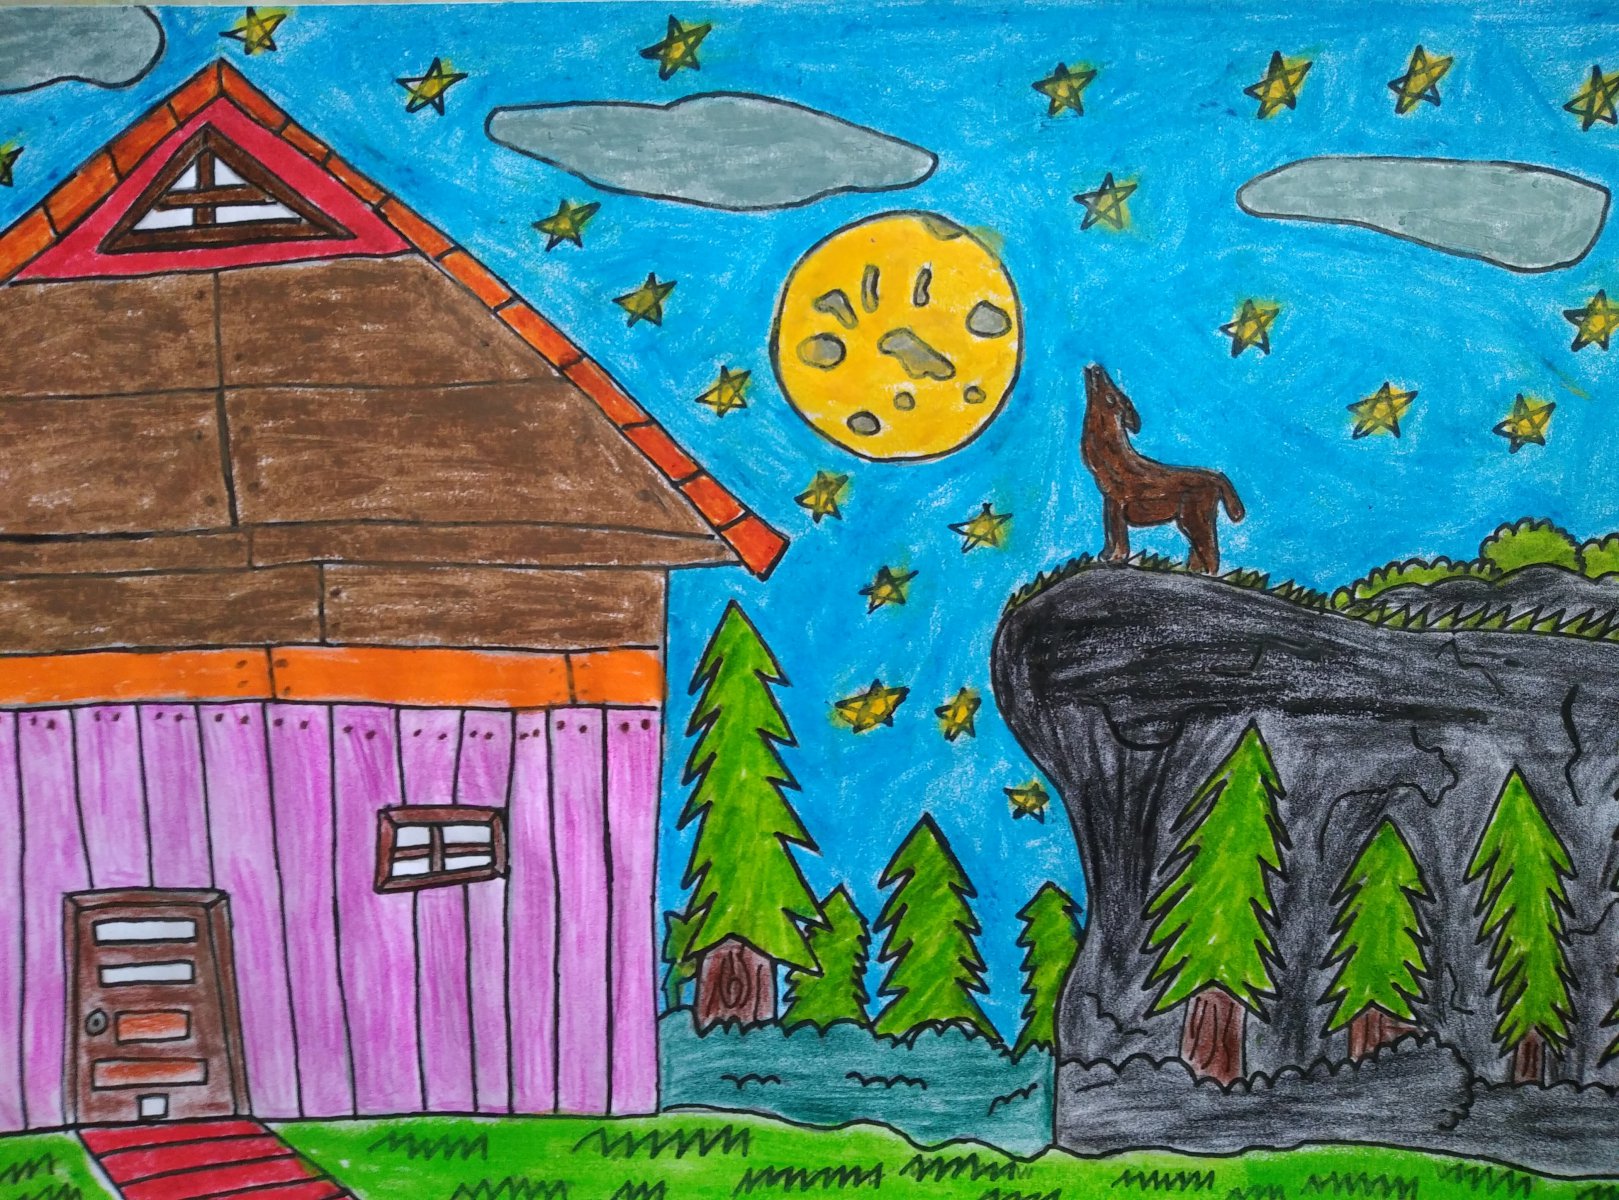 The house in the border of the forest - JOHN ( JOHN ART Gallery 2019).